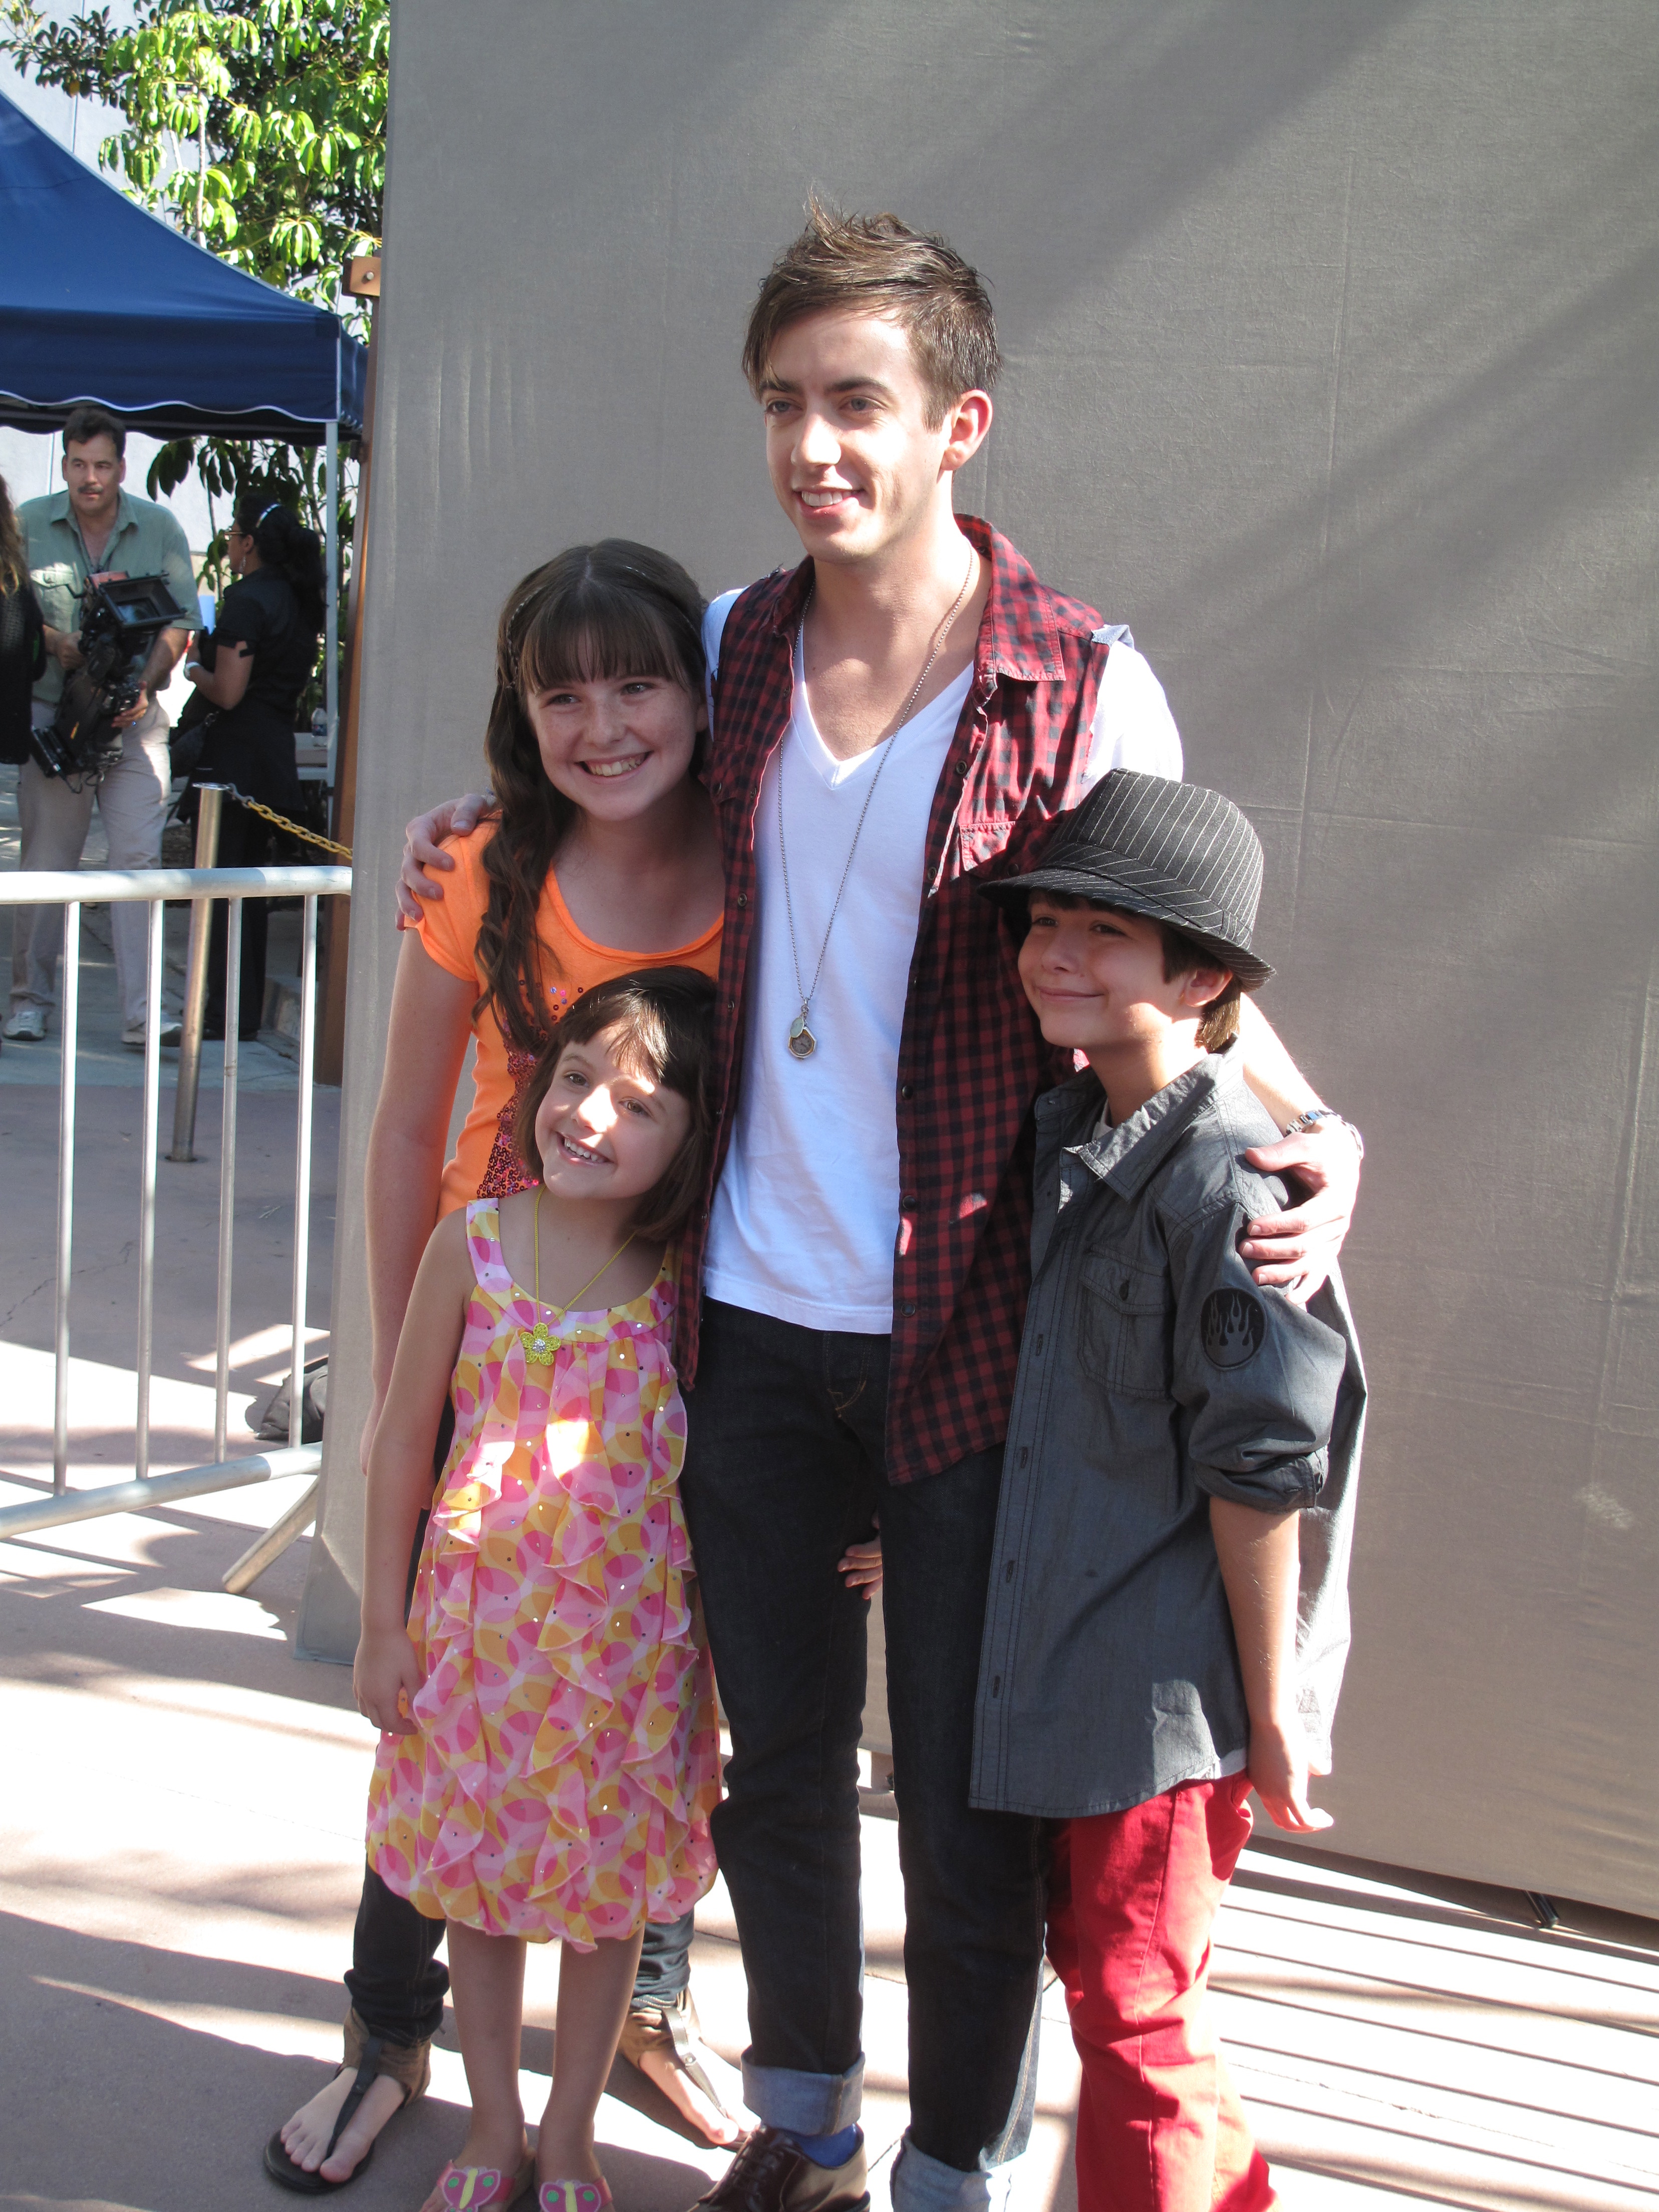 Teen Choice 2011 Reagan, Jack & Rose Horan with their uncle Kevin McHale